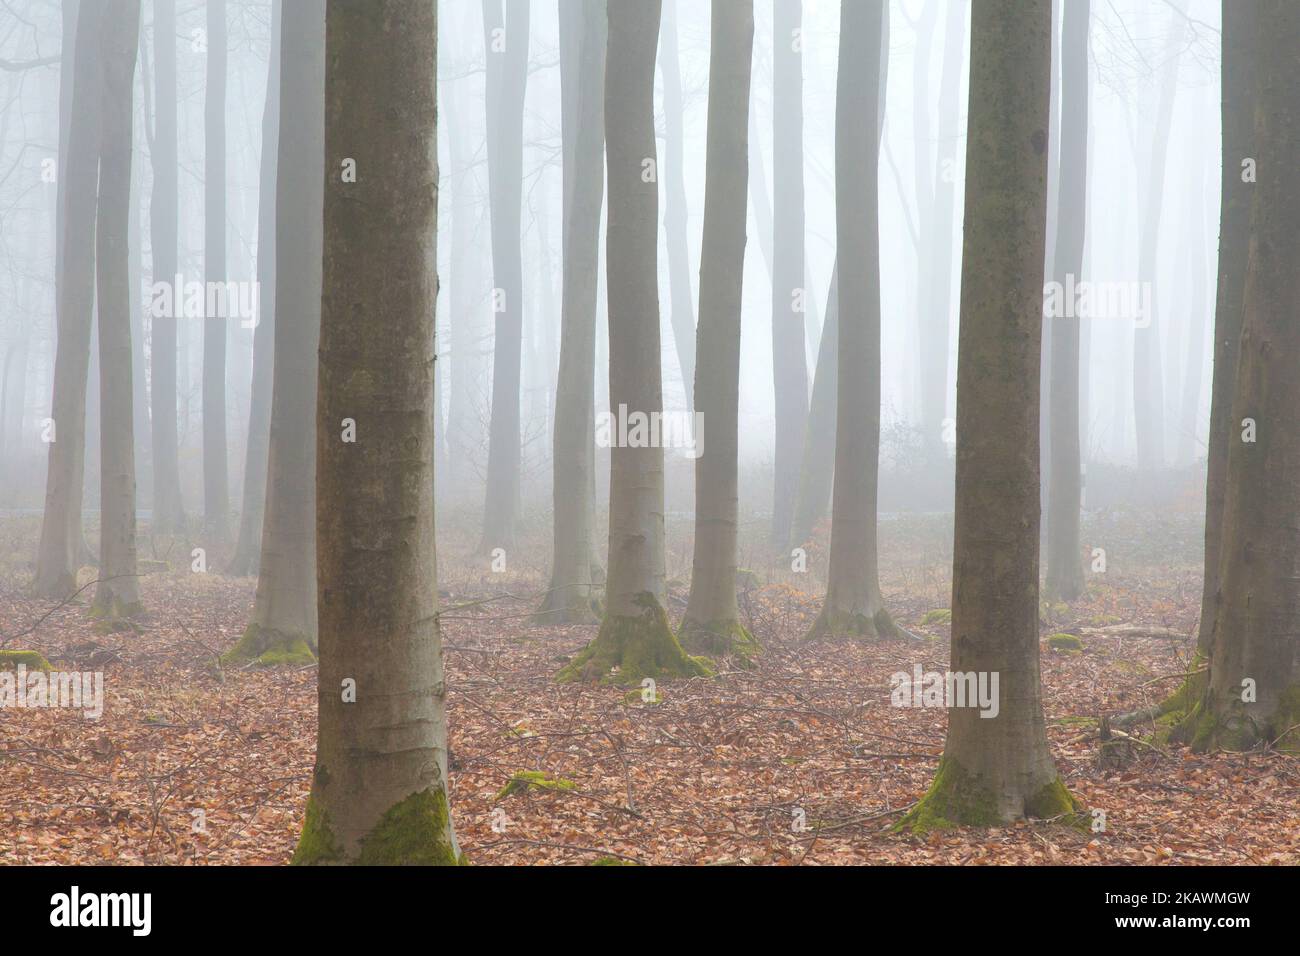 European beech trees / common beeches (Fagus sylvatica), tree trunks in wood covered in early morning mist with fallen autumn leaves on forest floor Stock Photo